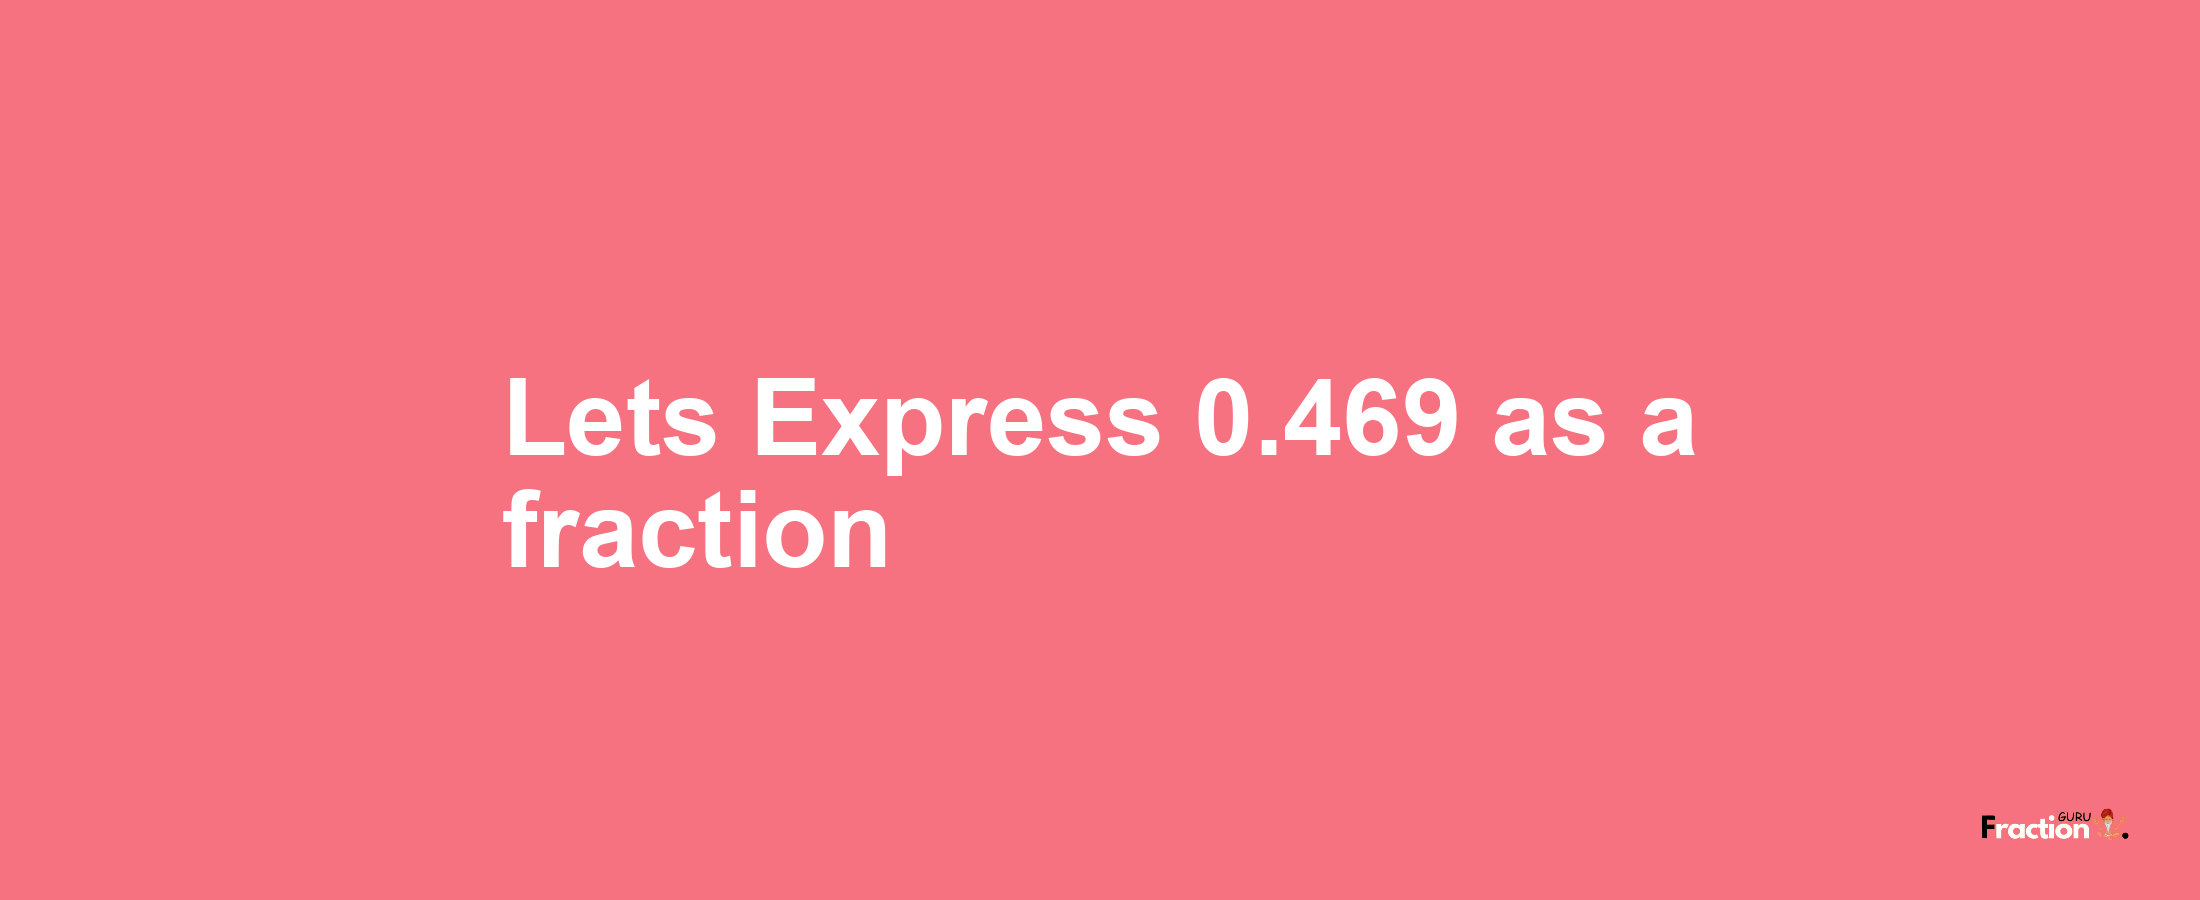 Lets Express 0.469 as afraction